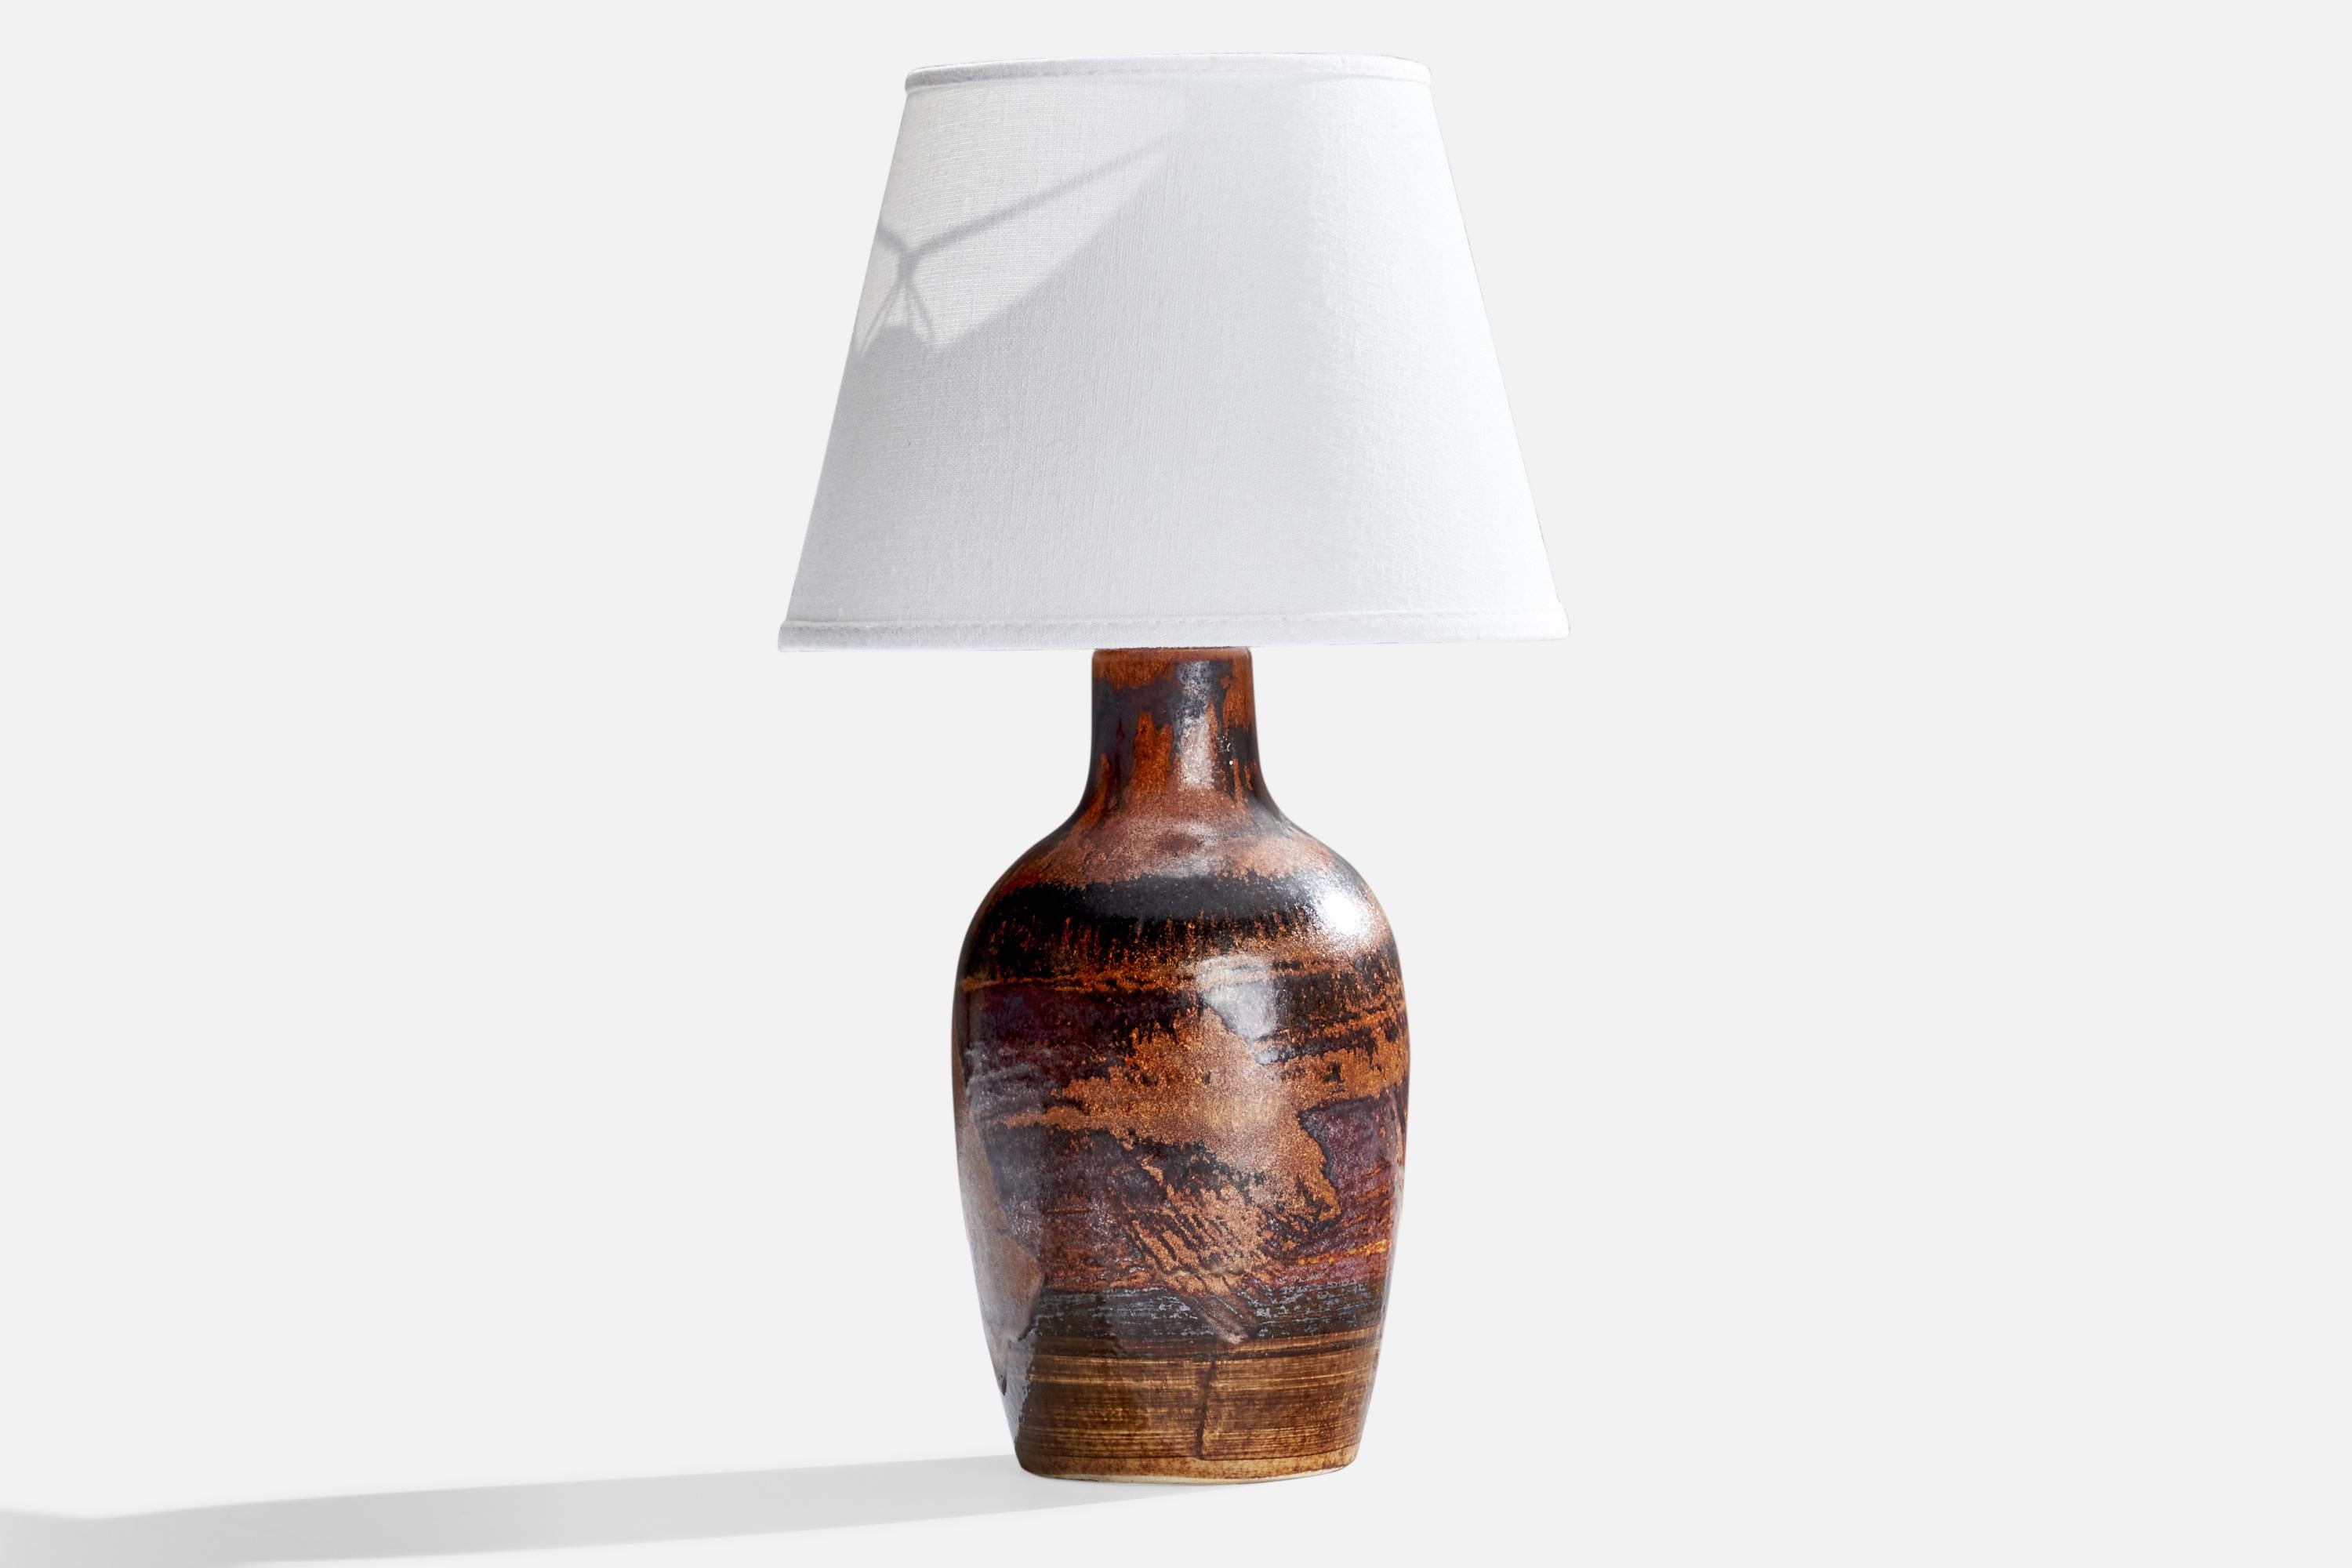 A black and brown-glazed stoneware table lamp designed by Carl-Harry Stålhane and Kent Ericsson, produced by Designhuset, Sweden, 1960s.

Dimensions of Lamp (inches): 10.75” H x 4.5”  Diameter
Dimensions of Shade (inches): 5” Top Diameter x 8”